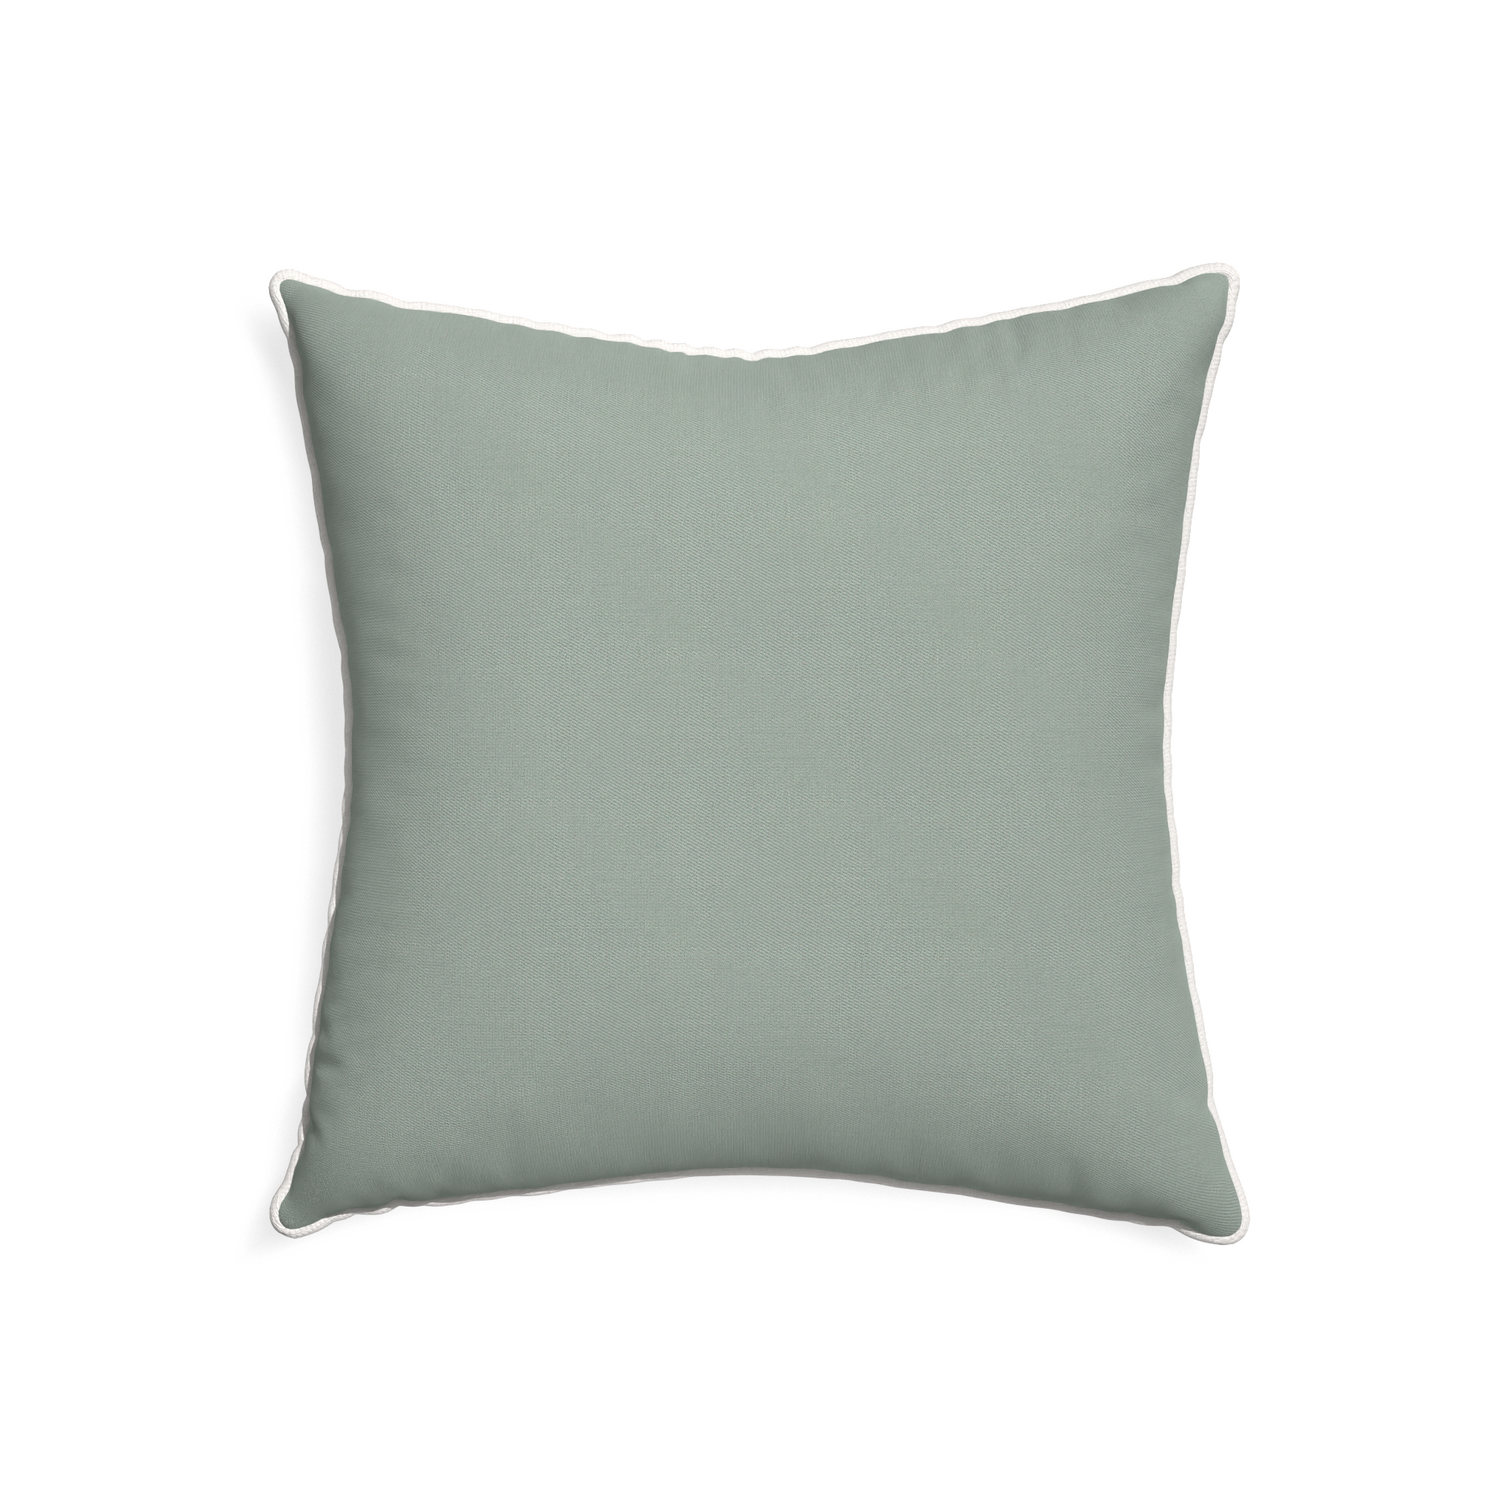 22-square sage custom pillow with snow piping on white background